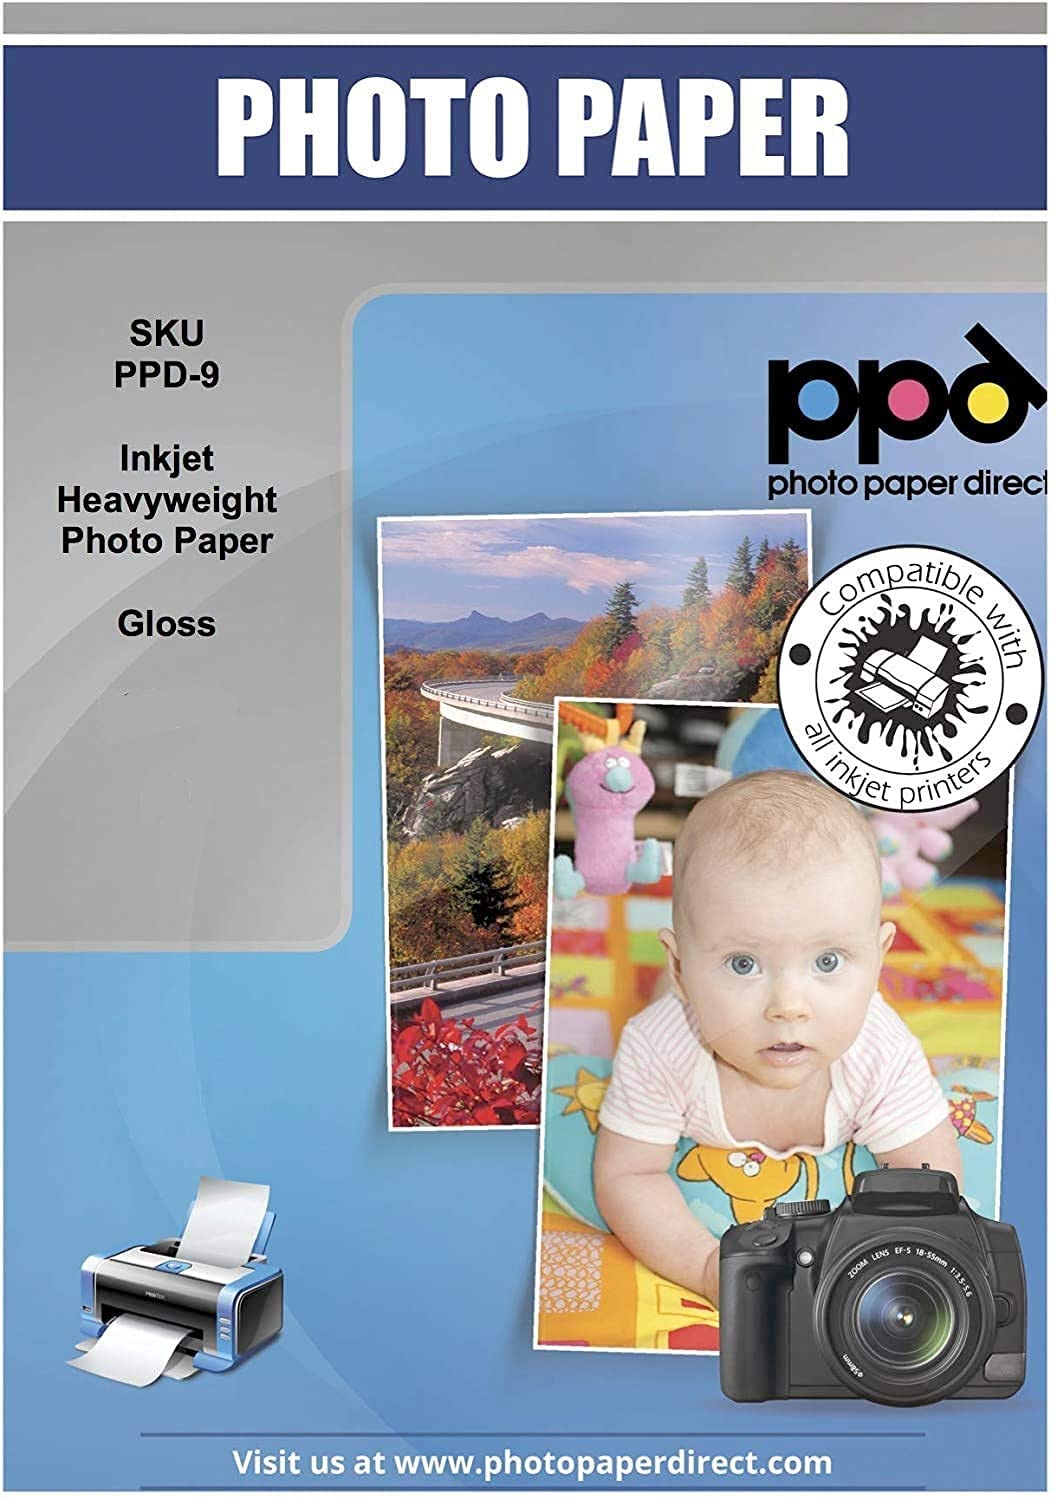 Inkjet Heavyweight Photo Paper Glossy 64lb. 240gsm 10.9mil 11 x 17" PPD-9